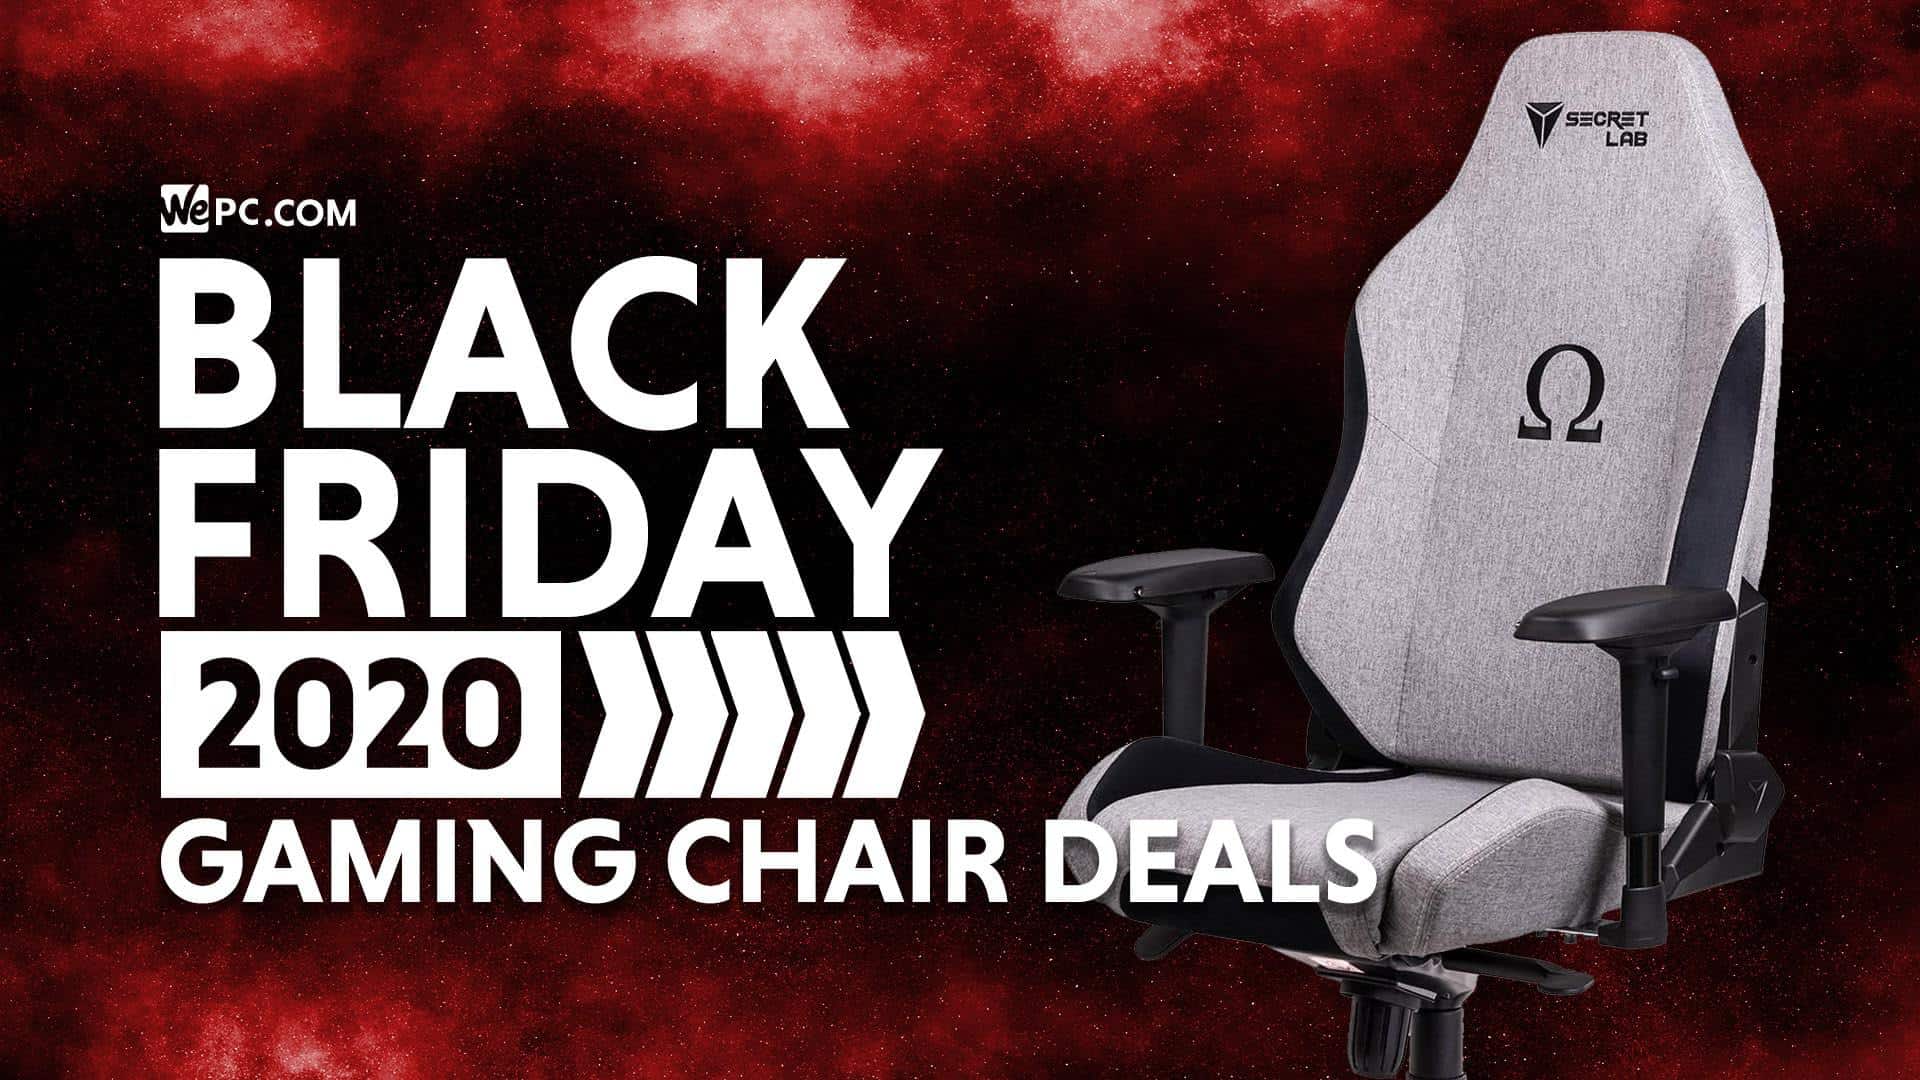 Black Friday Gaming Chairs Deals In 2020 Wepc